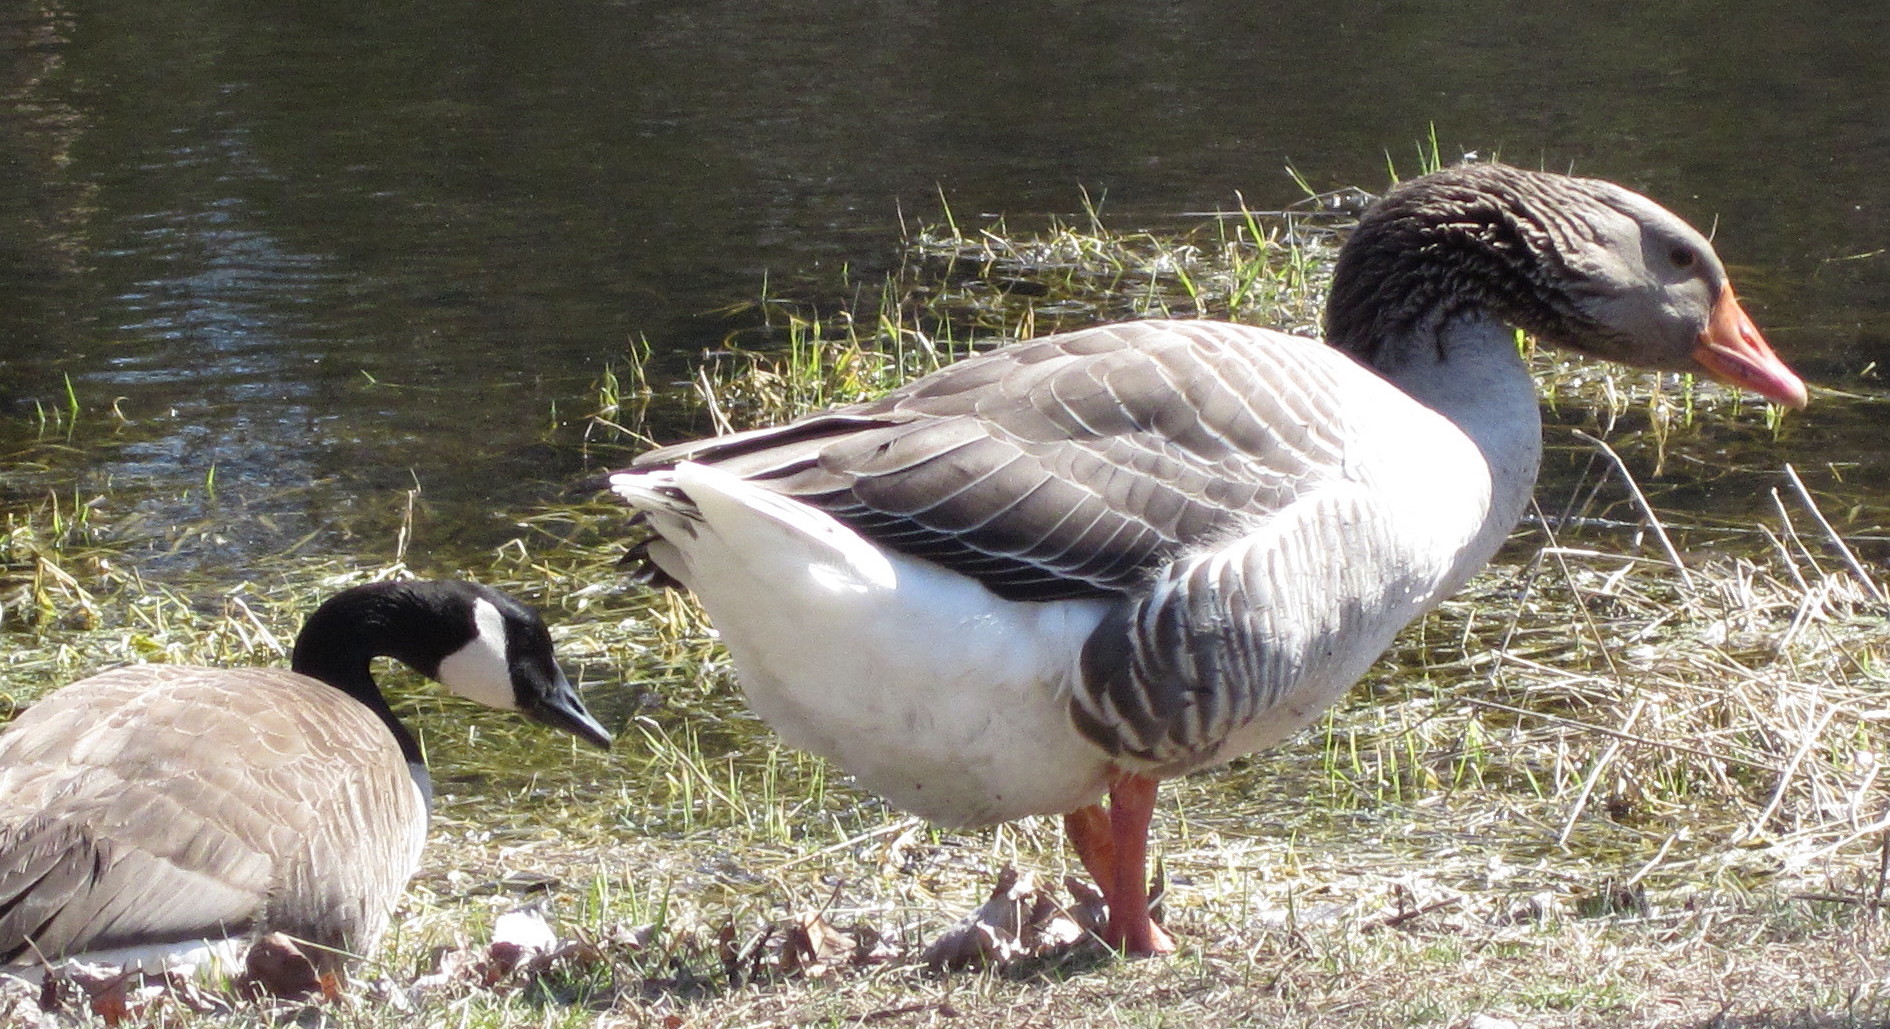 Goose In Northboro Ma (user submitted)